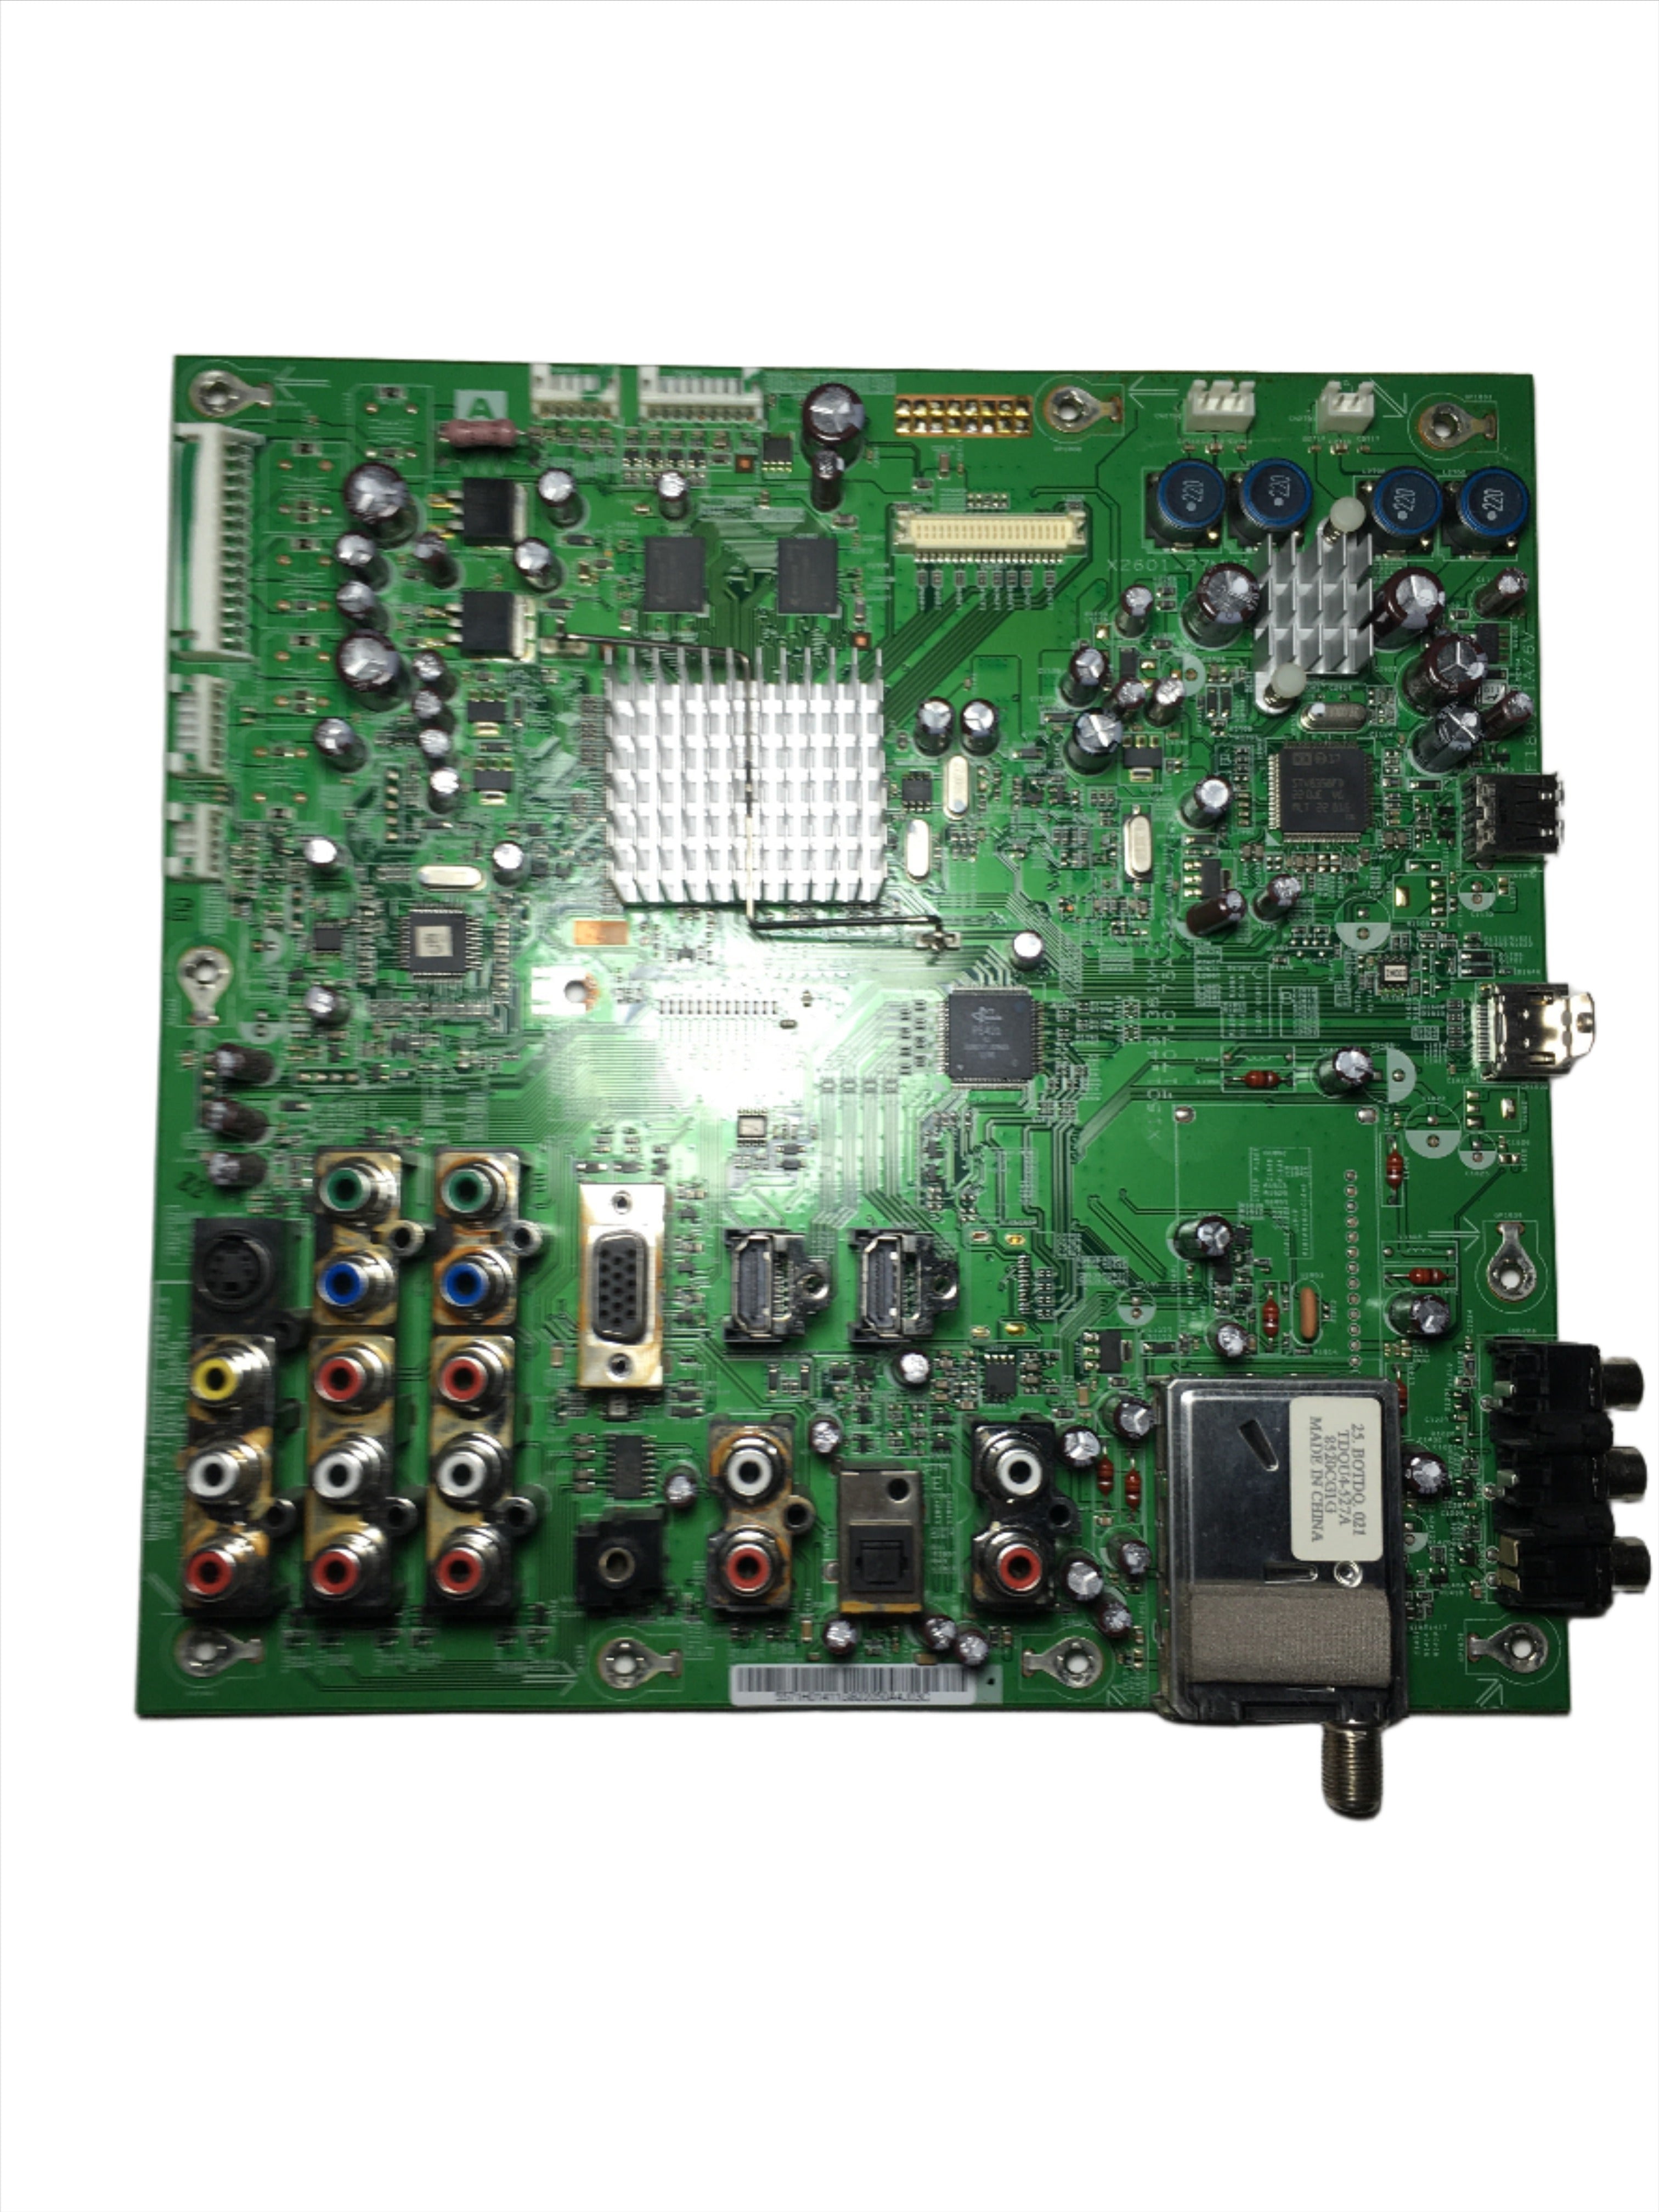 Sony 1-857-092-21 (55.71H01.411G) Main A Board for KDL-46S4100